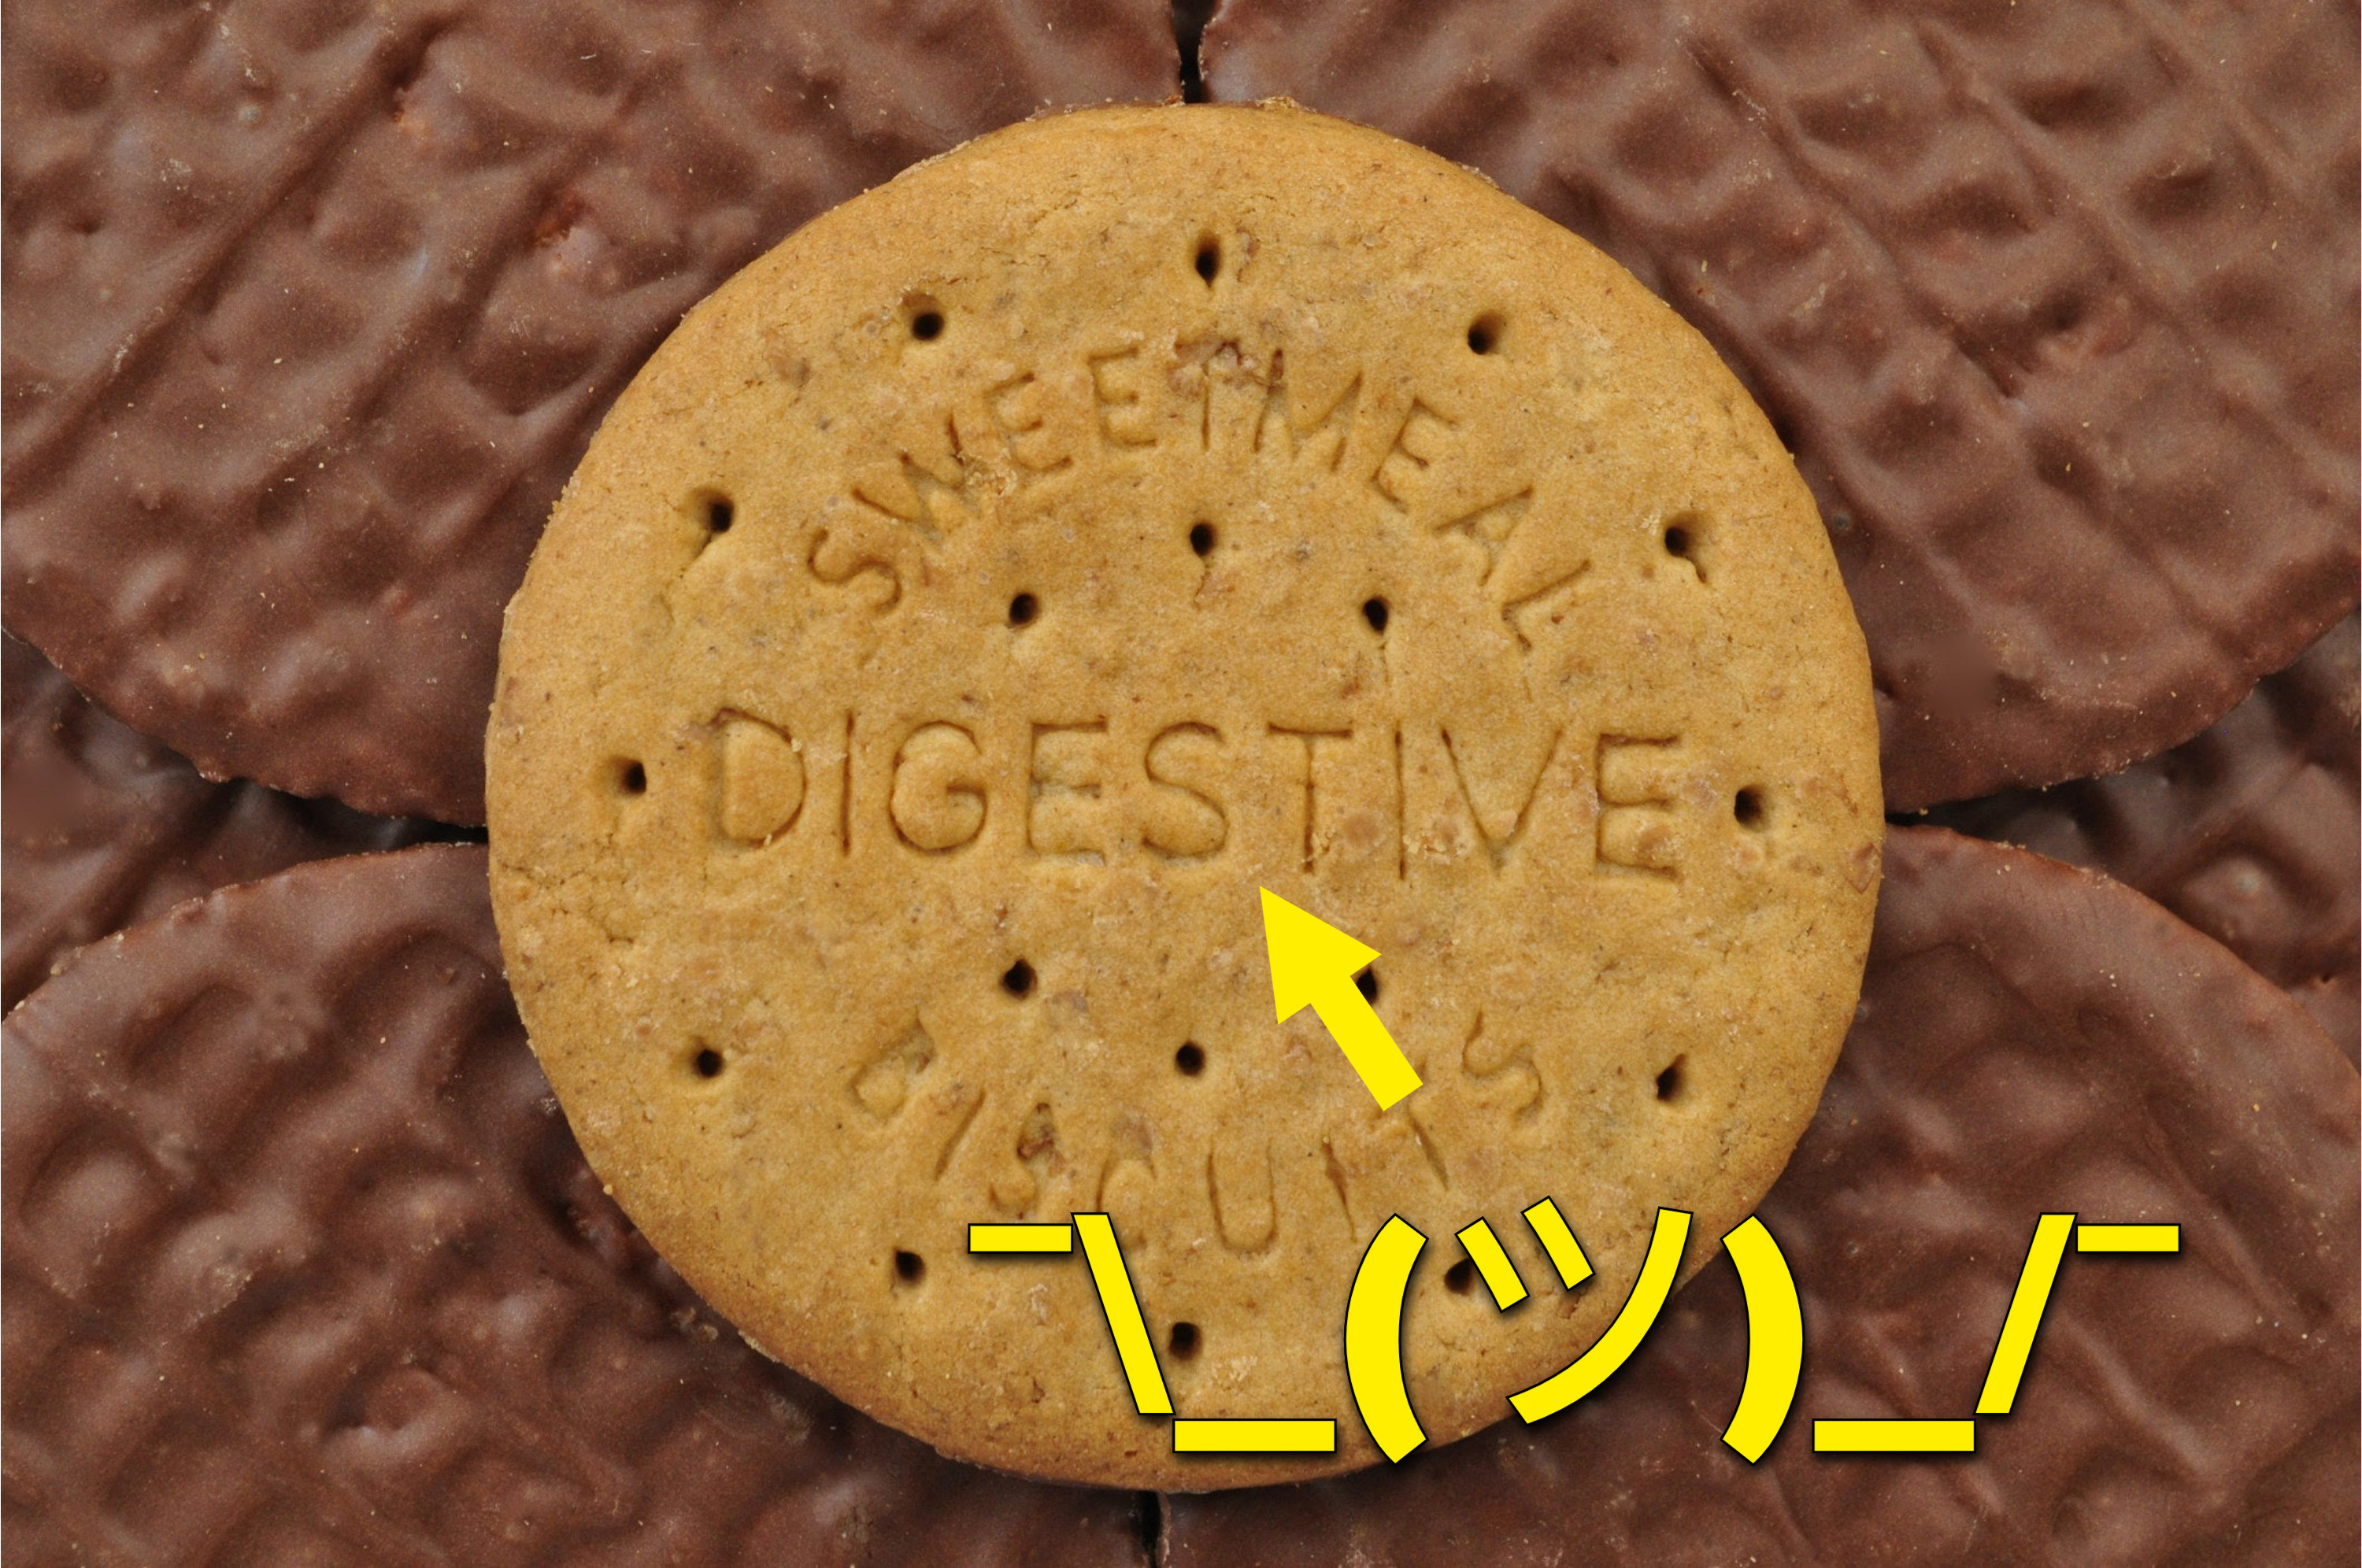 A chocolate coated digestive biscuit